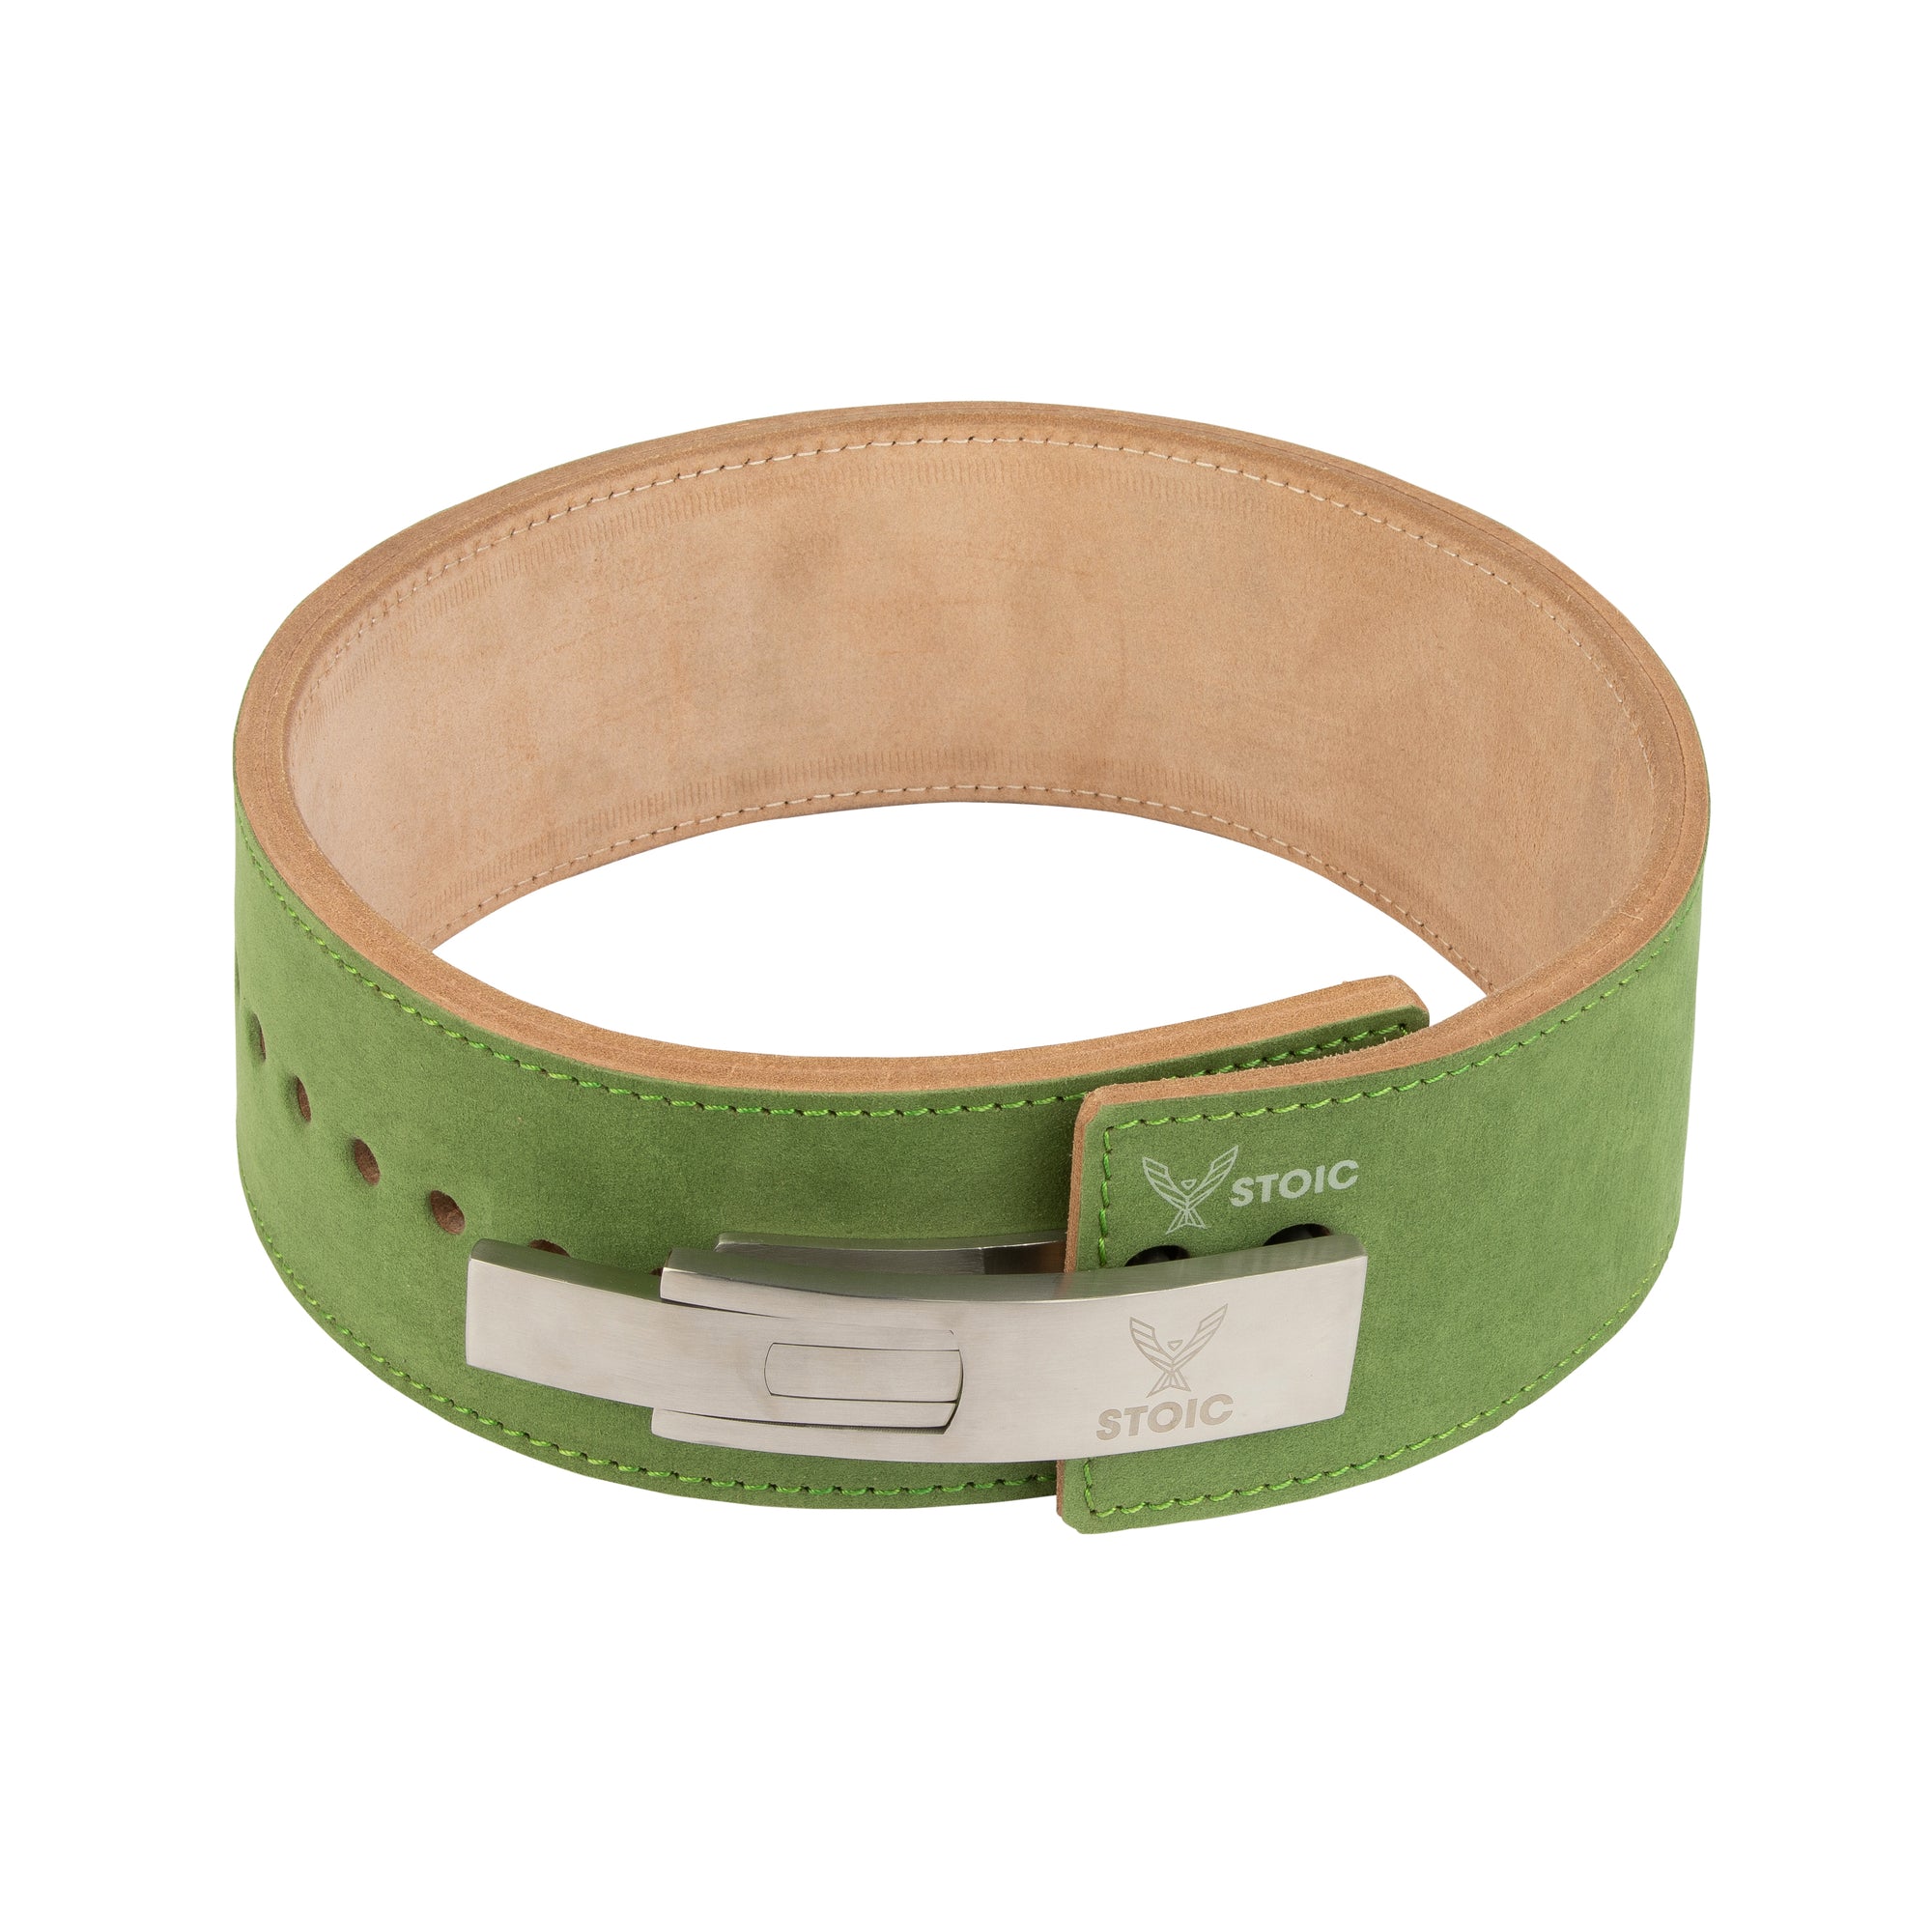 Stoic Lever Powerlifting Belt (13mm) - Olive Drab